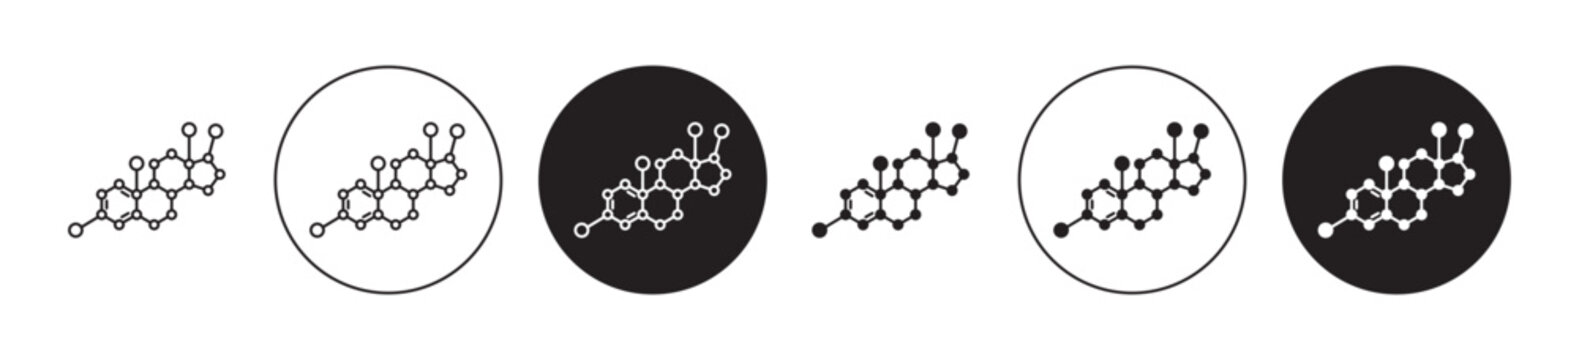 Hormones icon set. human growth hormons vector symbol. testosterone male or Estrogen female hormon line icon in black filled and outlined style.